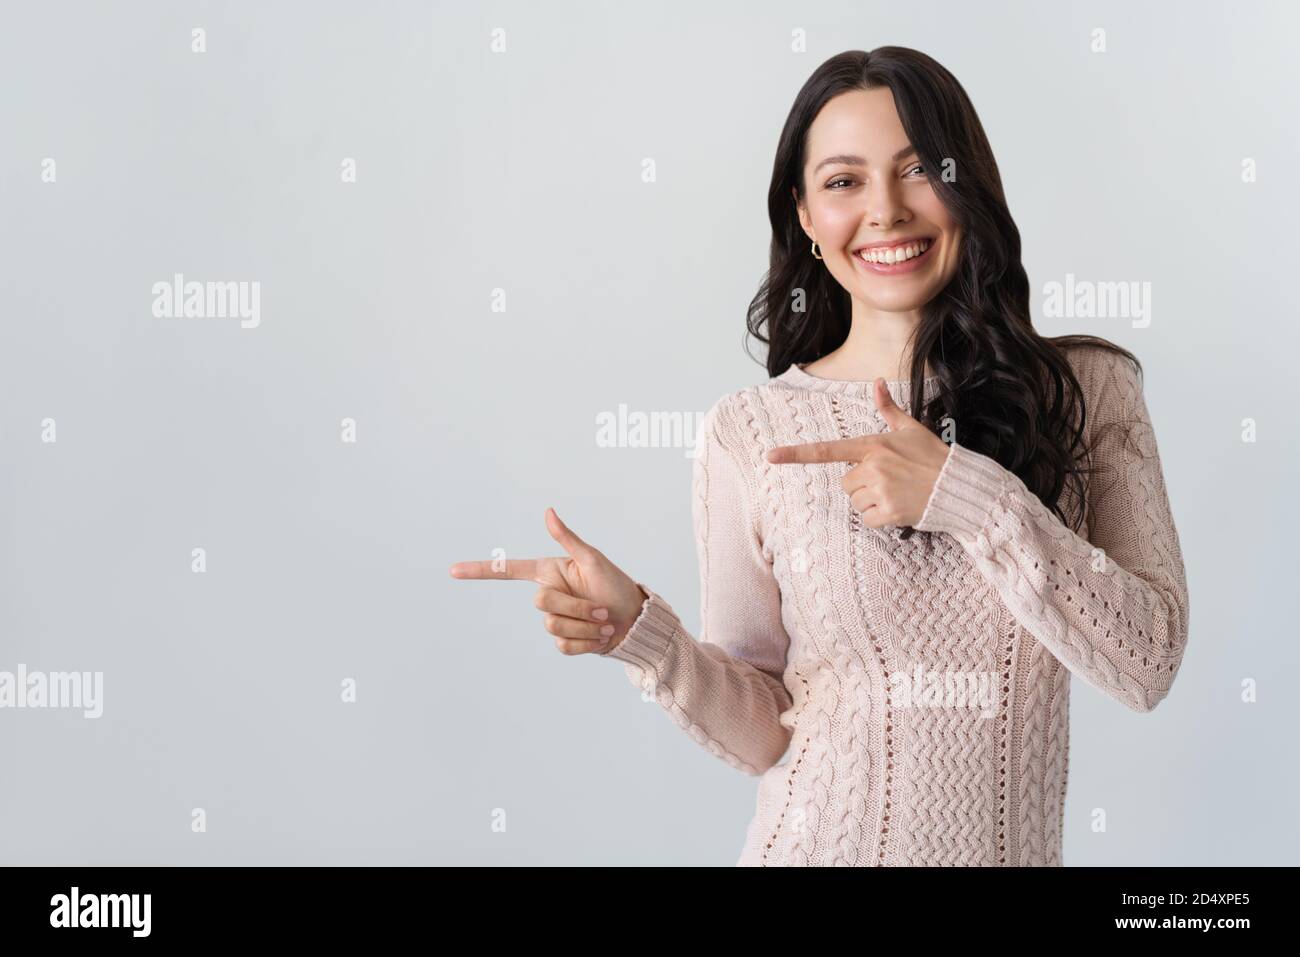 Young woman smiling and gesturing to copy space. Stock Photo